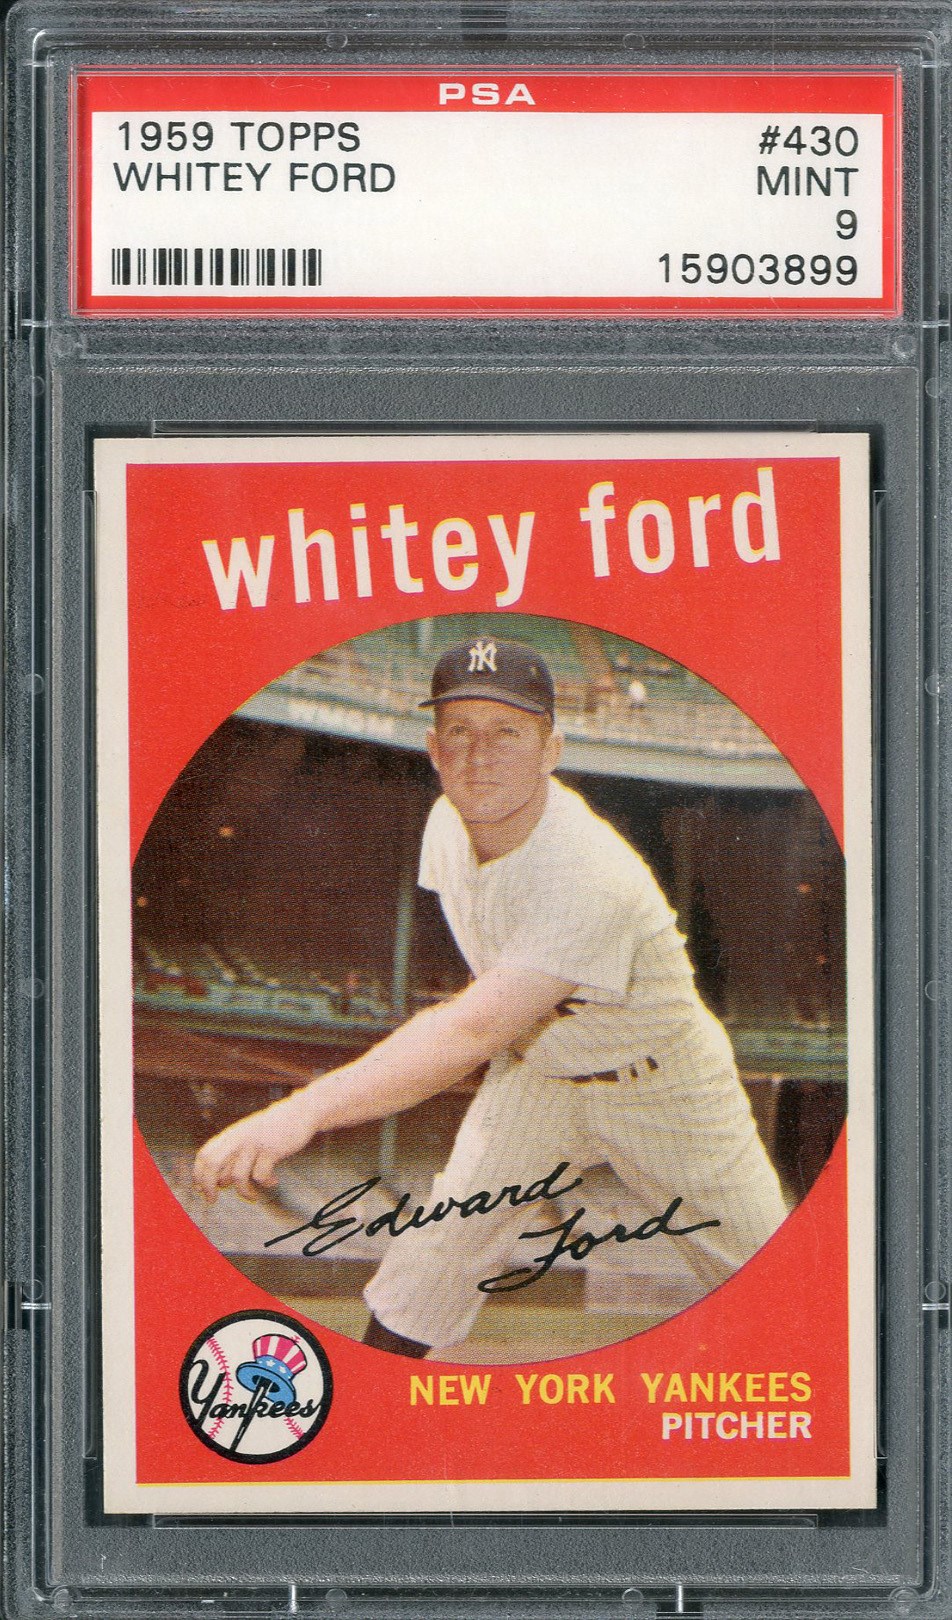 Baseball and Trading Cards - 1959 Topps #430 Whitey Ford PSA MINT 9